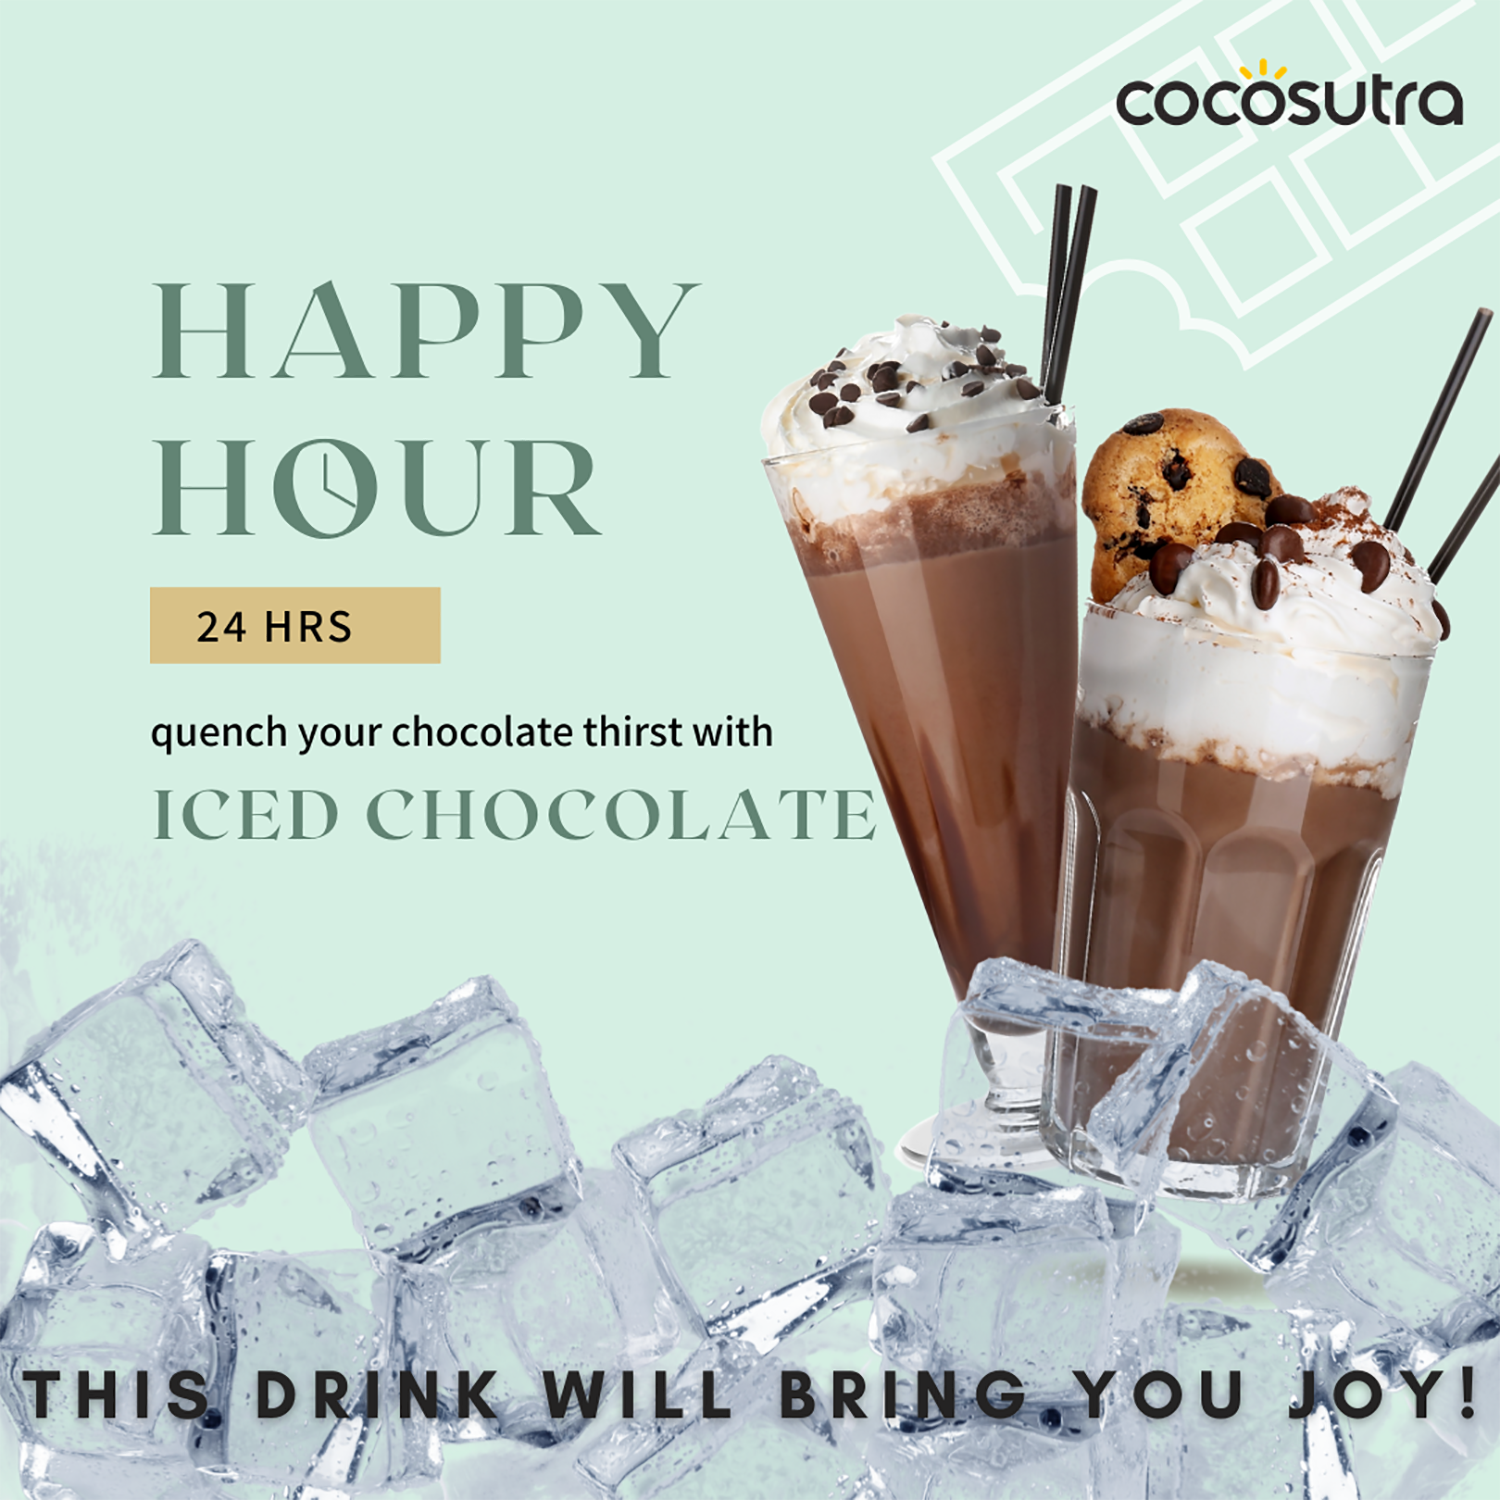 Sugar Free Drinking Chocolate Mix - Cocosutra - Summer Shakes